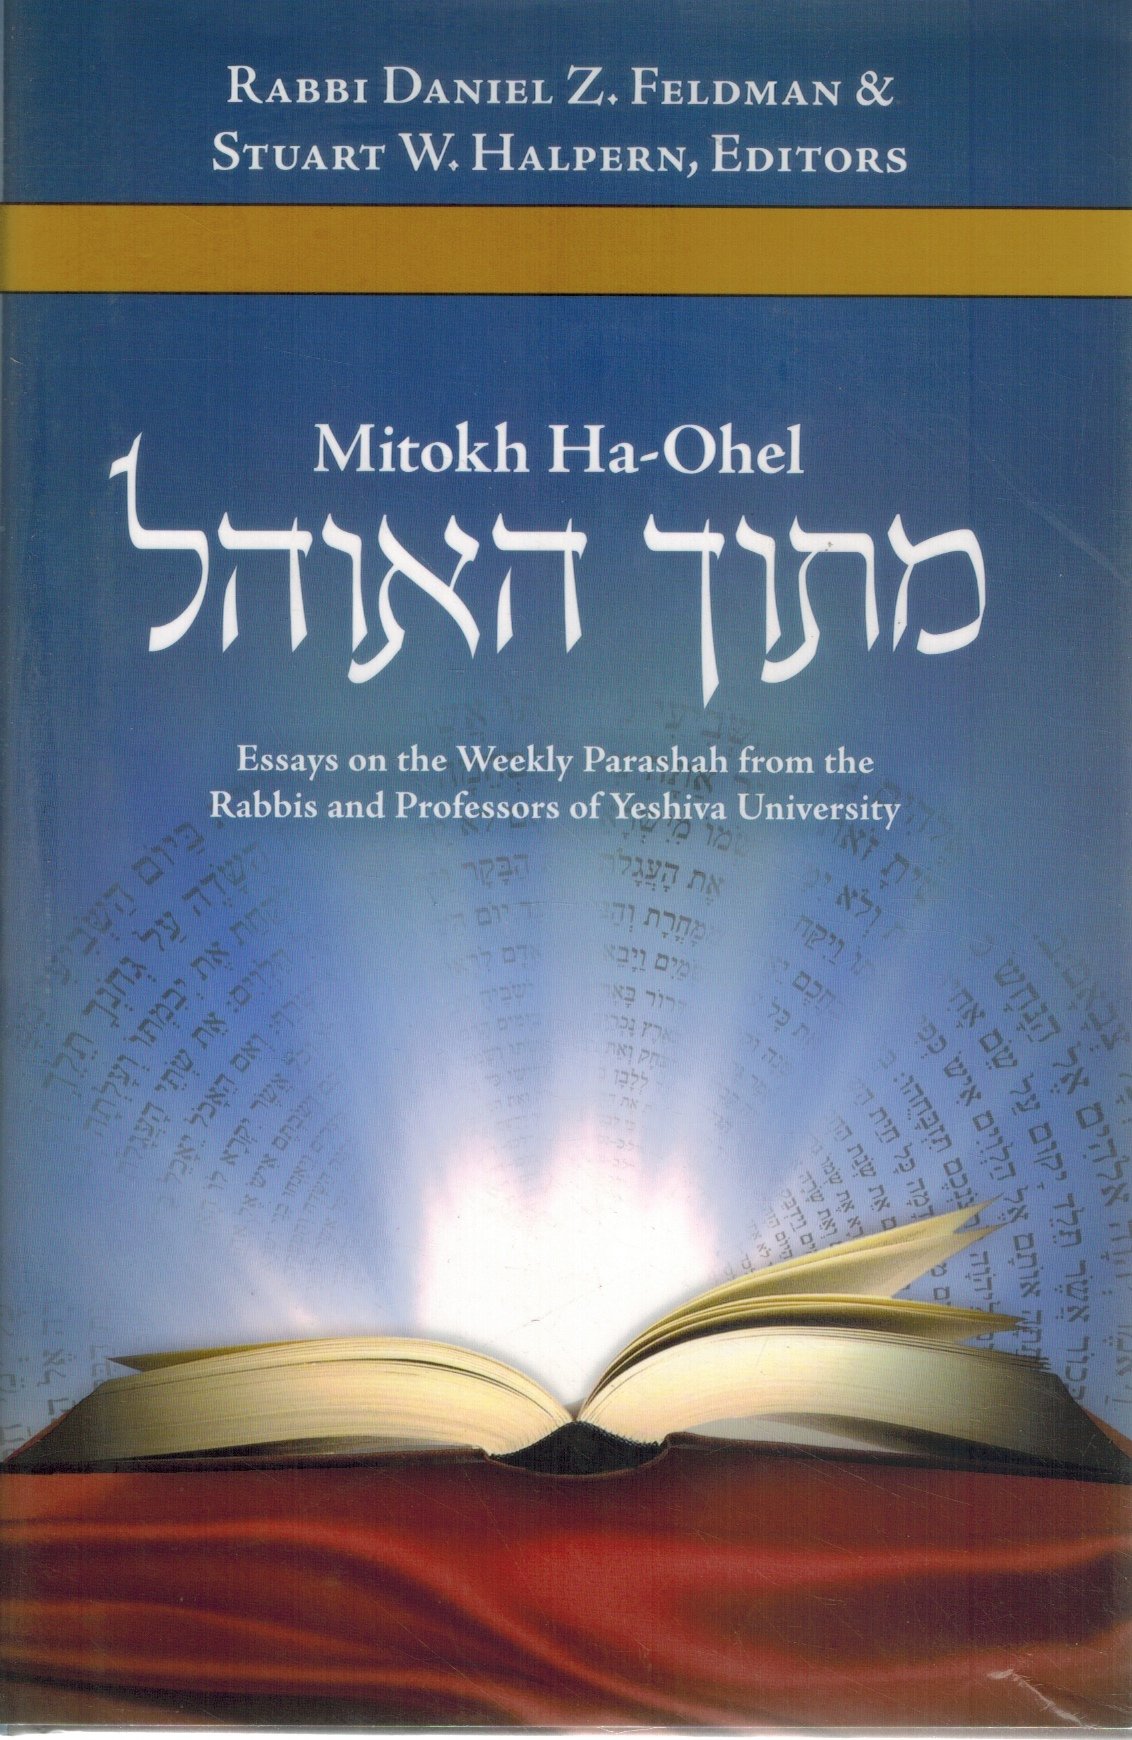 MITOKH HA-OHEL, FROM WITHIN THE TENT The Weekly Parashah from the Rabbis  and Professors of Yeshiva University  by W. Halpern